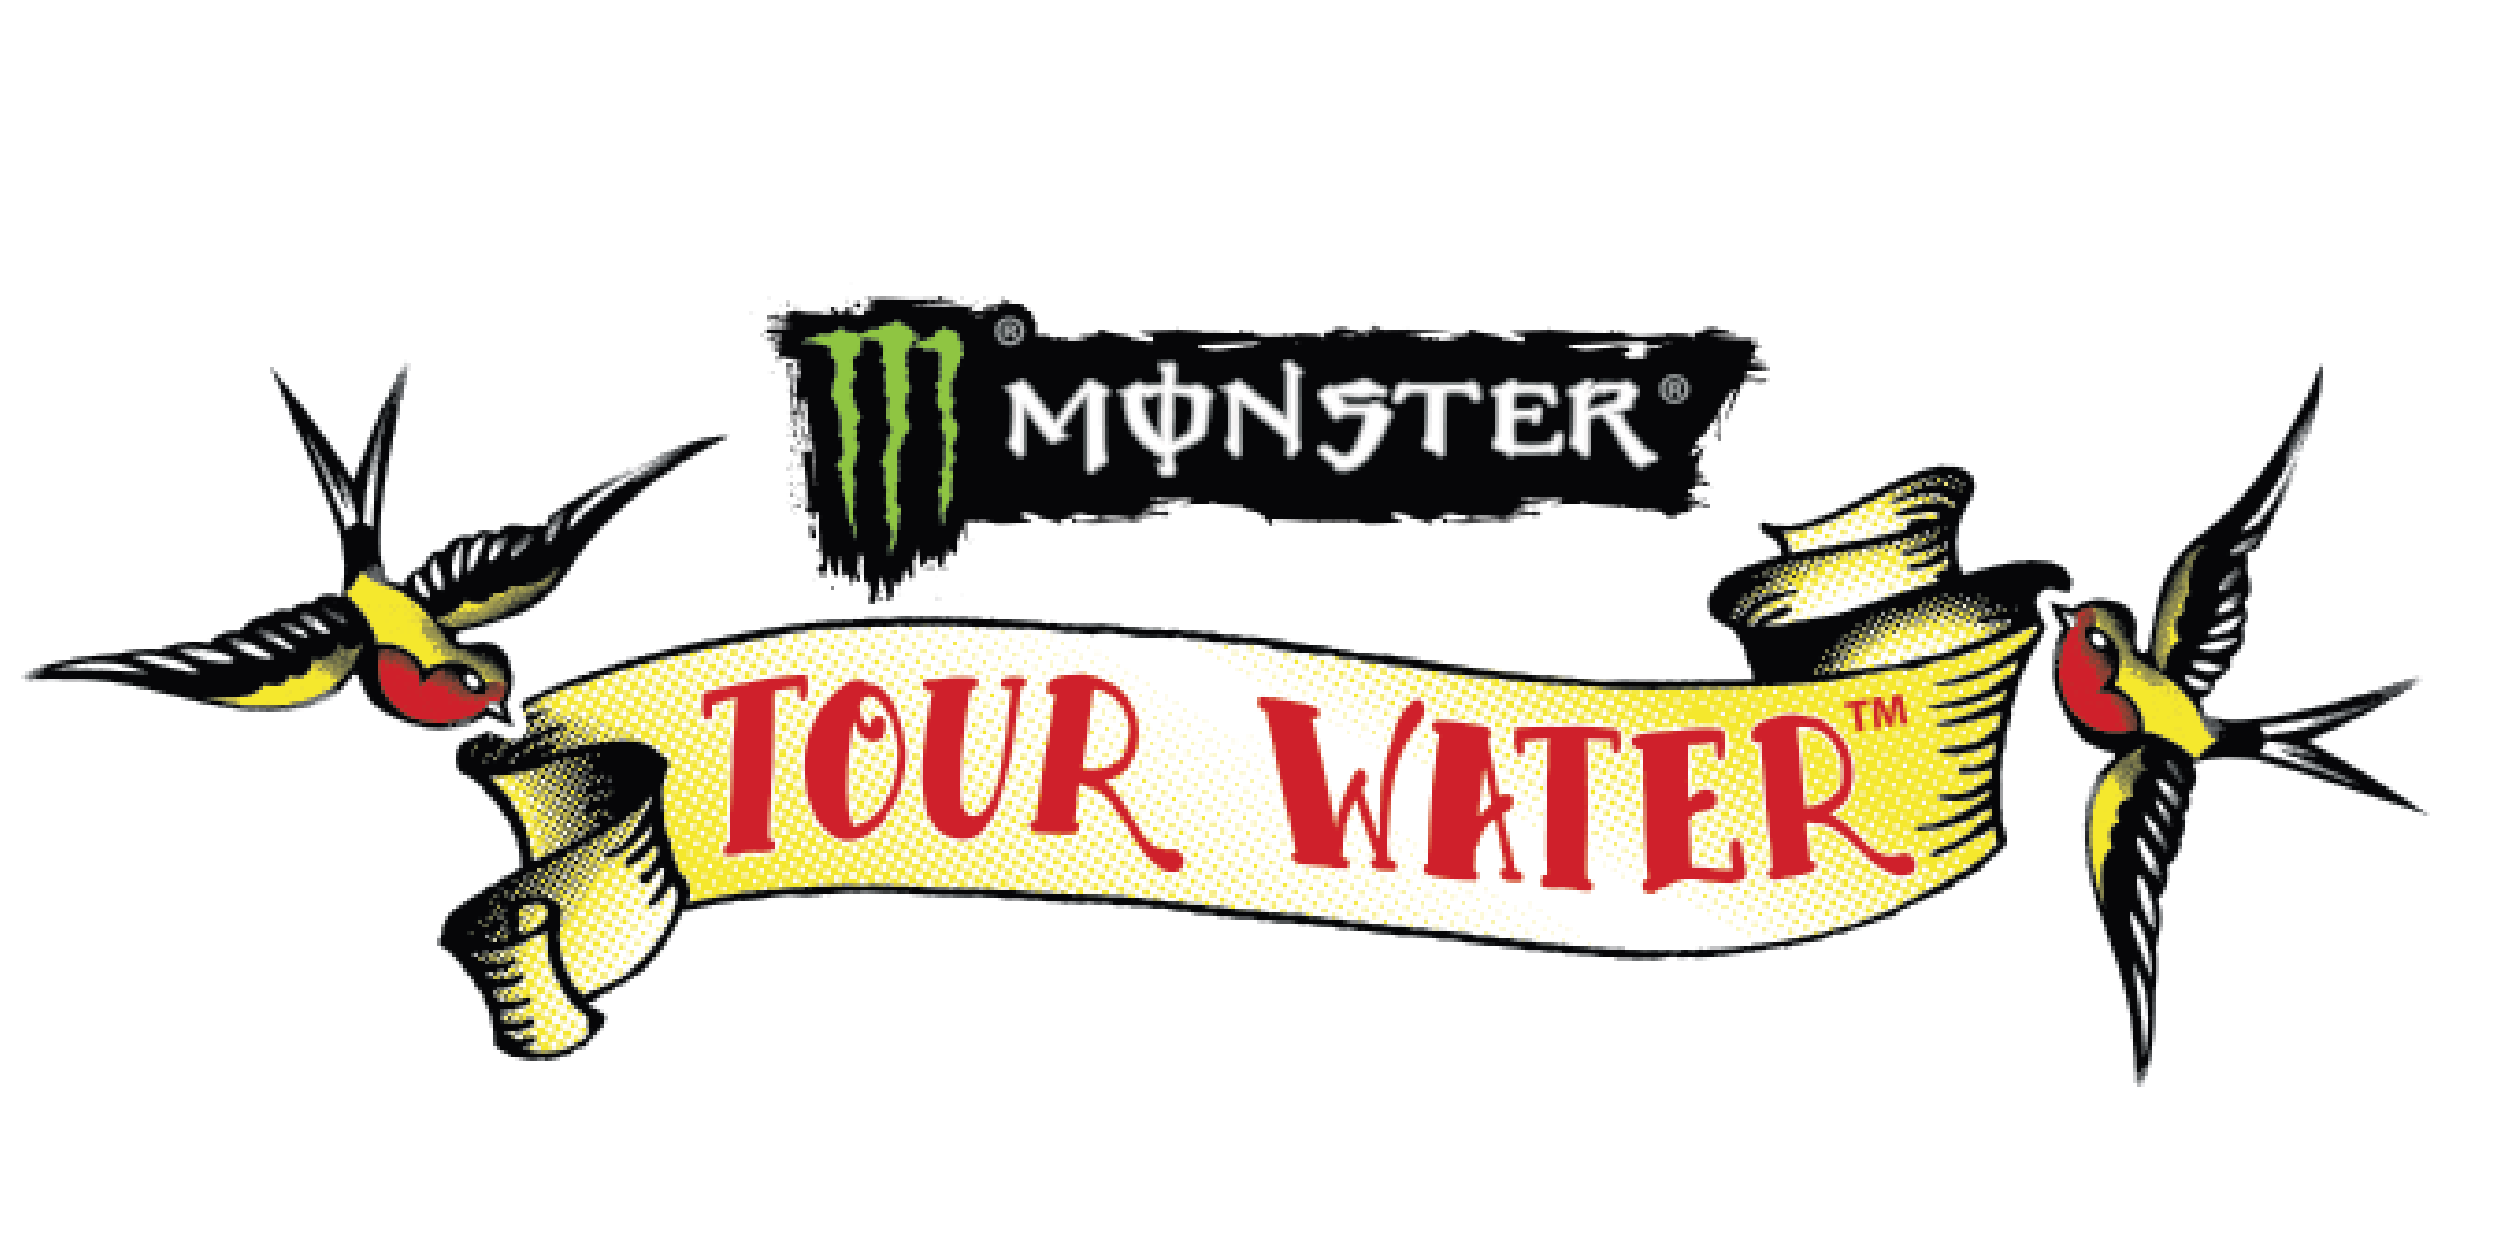 Monster tour water.png